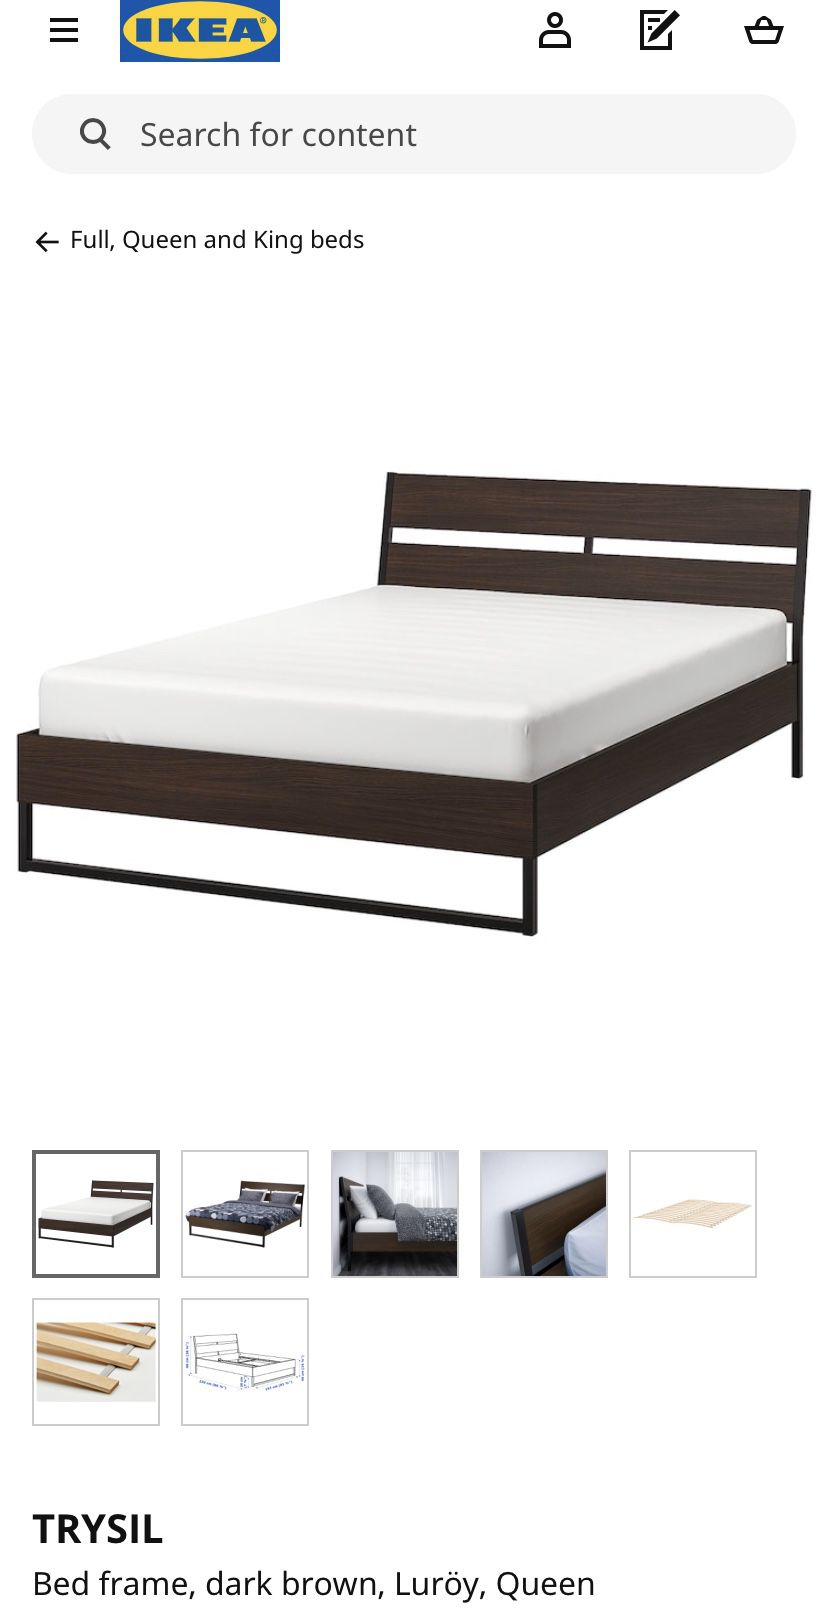 Assembled, like-new TRYSIL queen bed frame from IKEA!